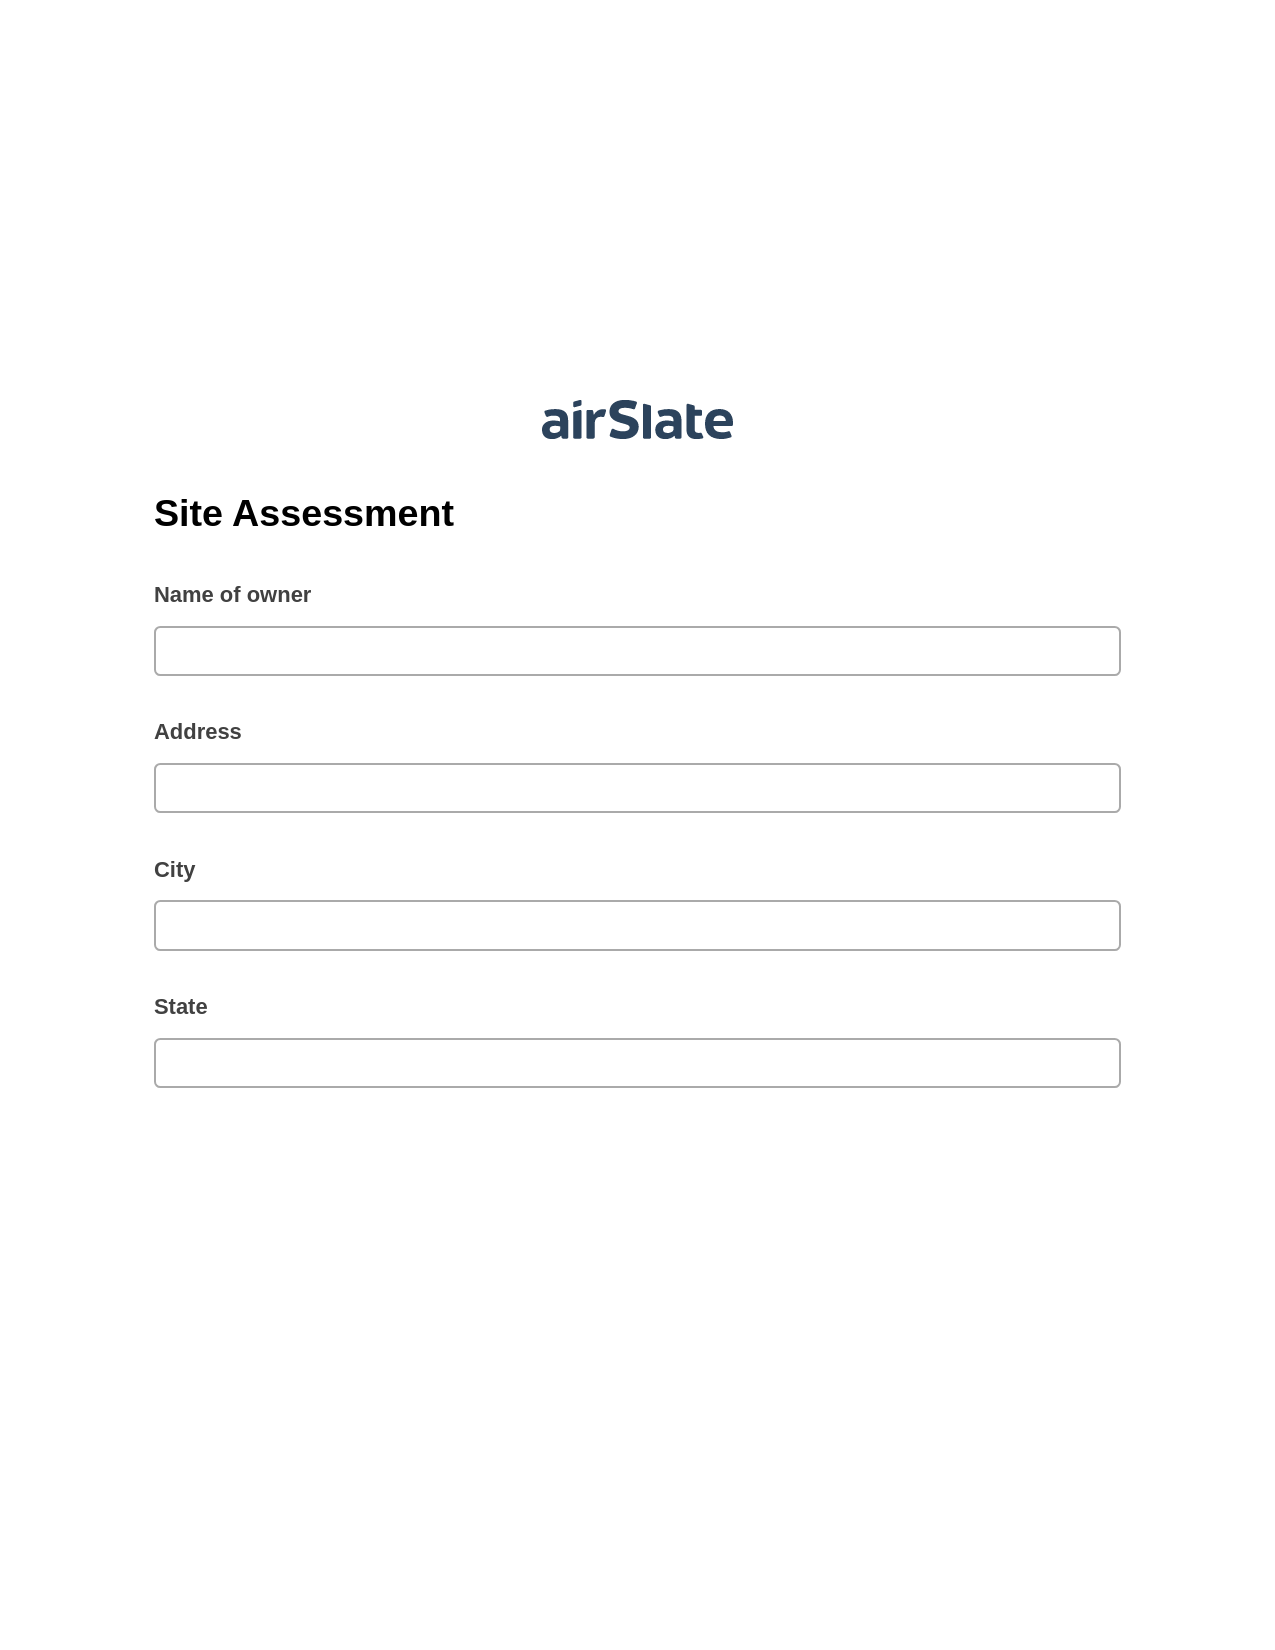 Site Assessment Pre-fill from NetSuite Records Bot, Pre-fill with Custom Data Bot, Post-finish Document Bot